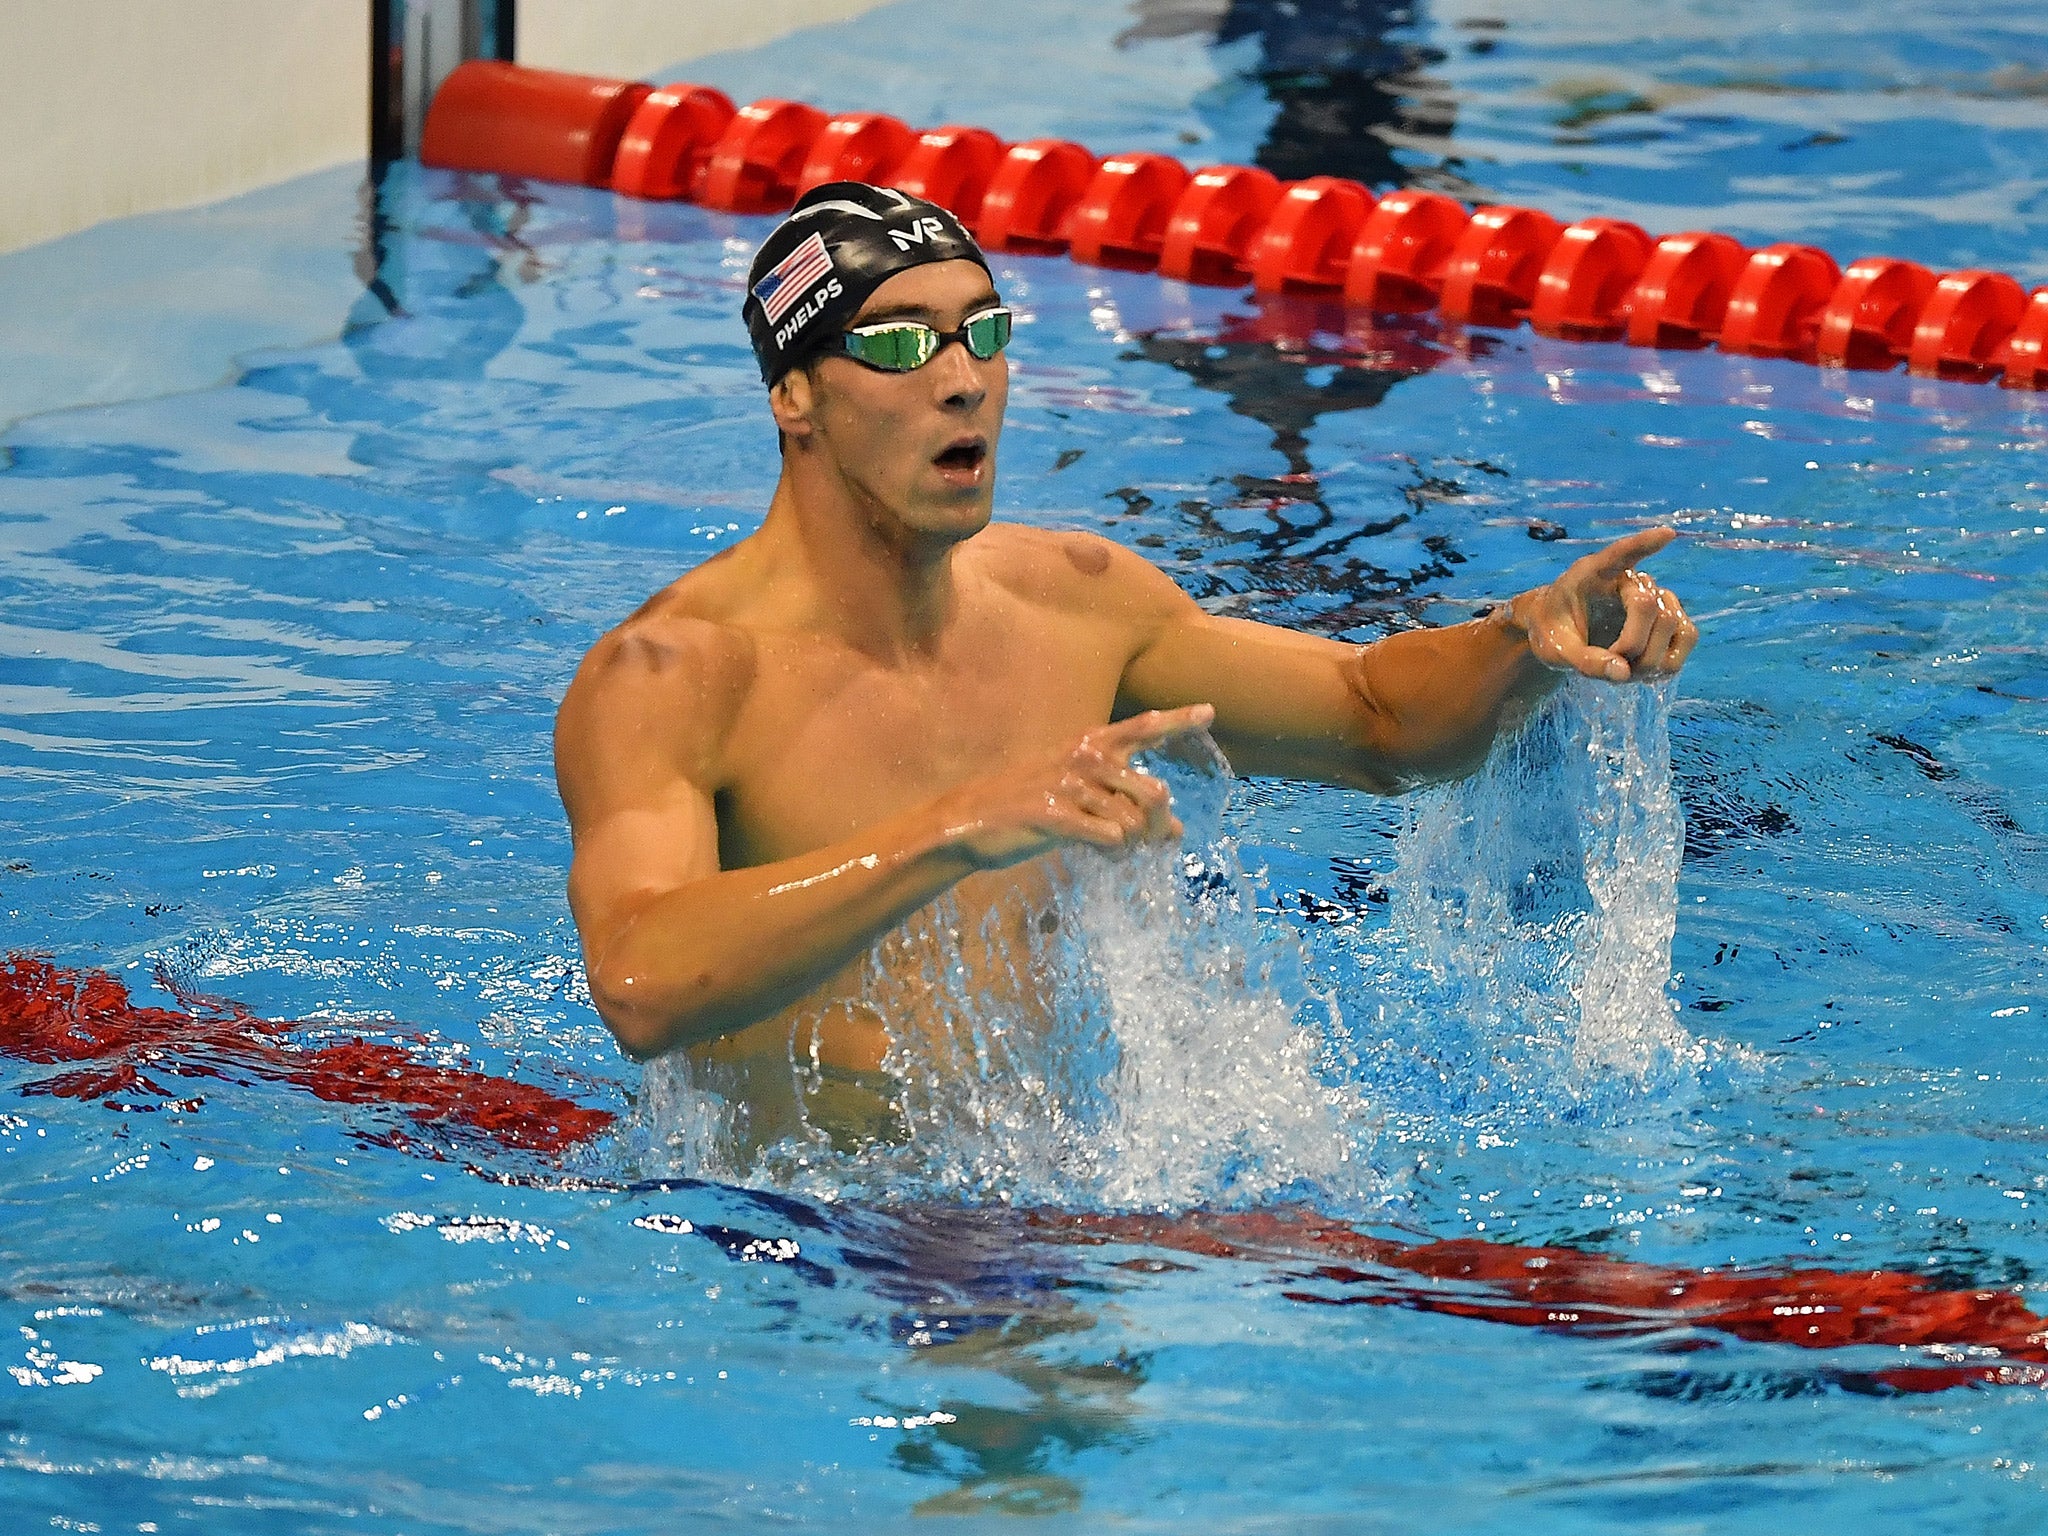 Michael Phelps celebrates his victory in the men's 200m butterfly